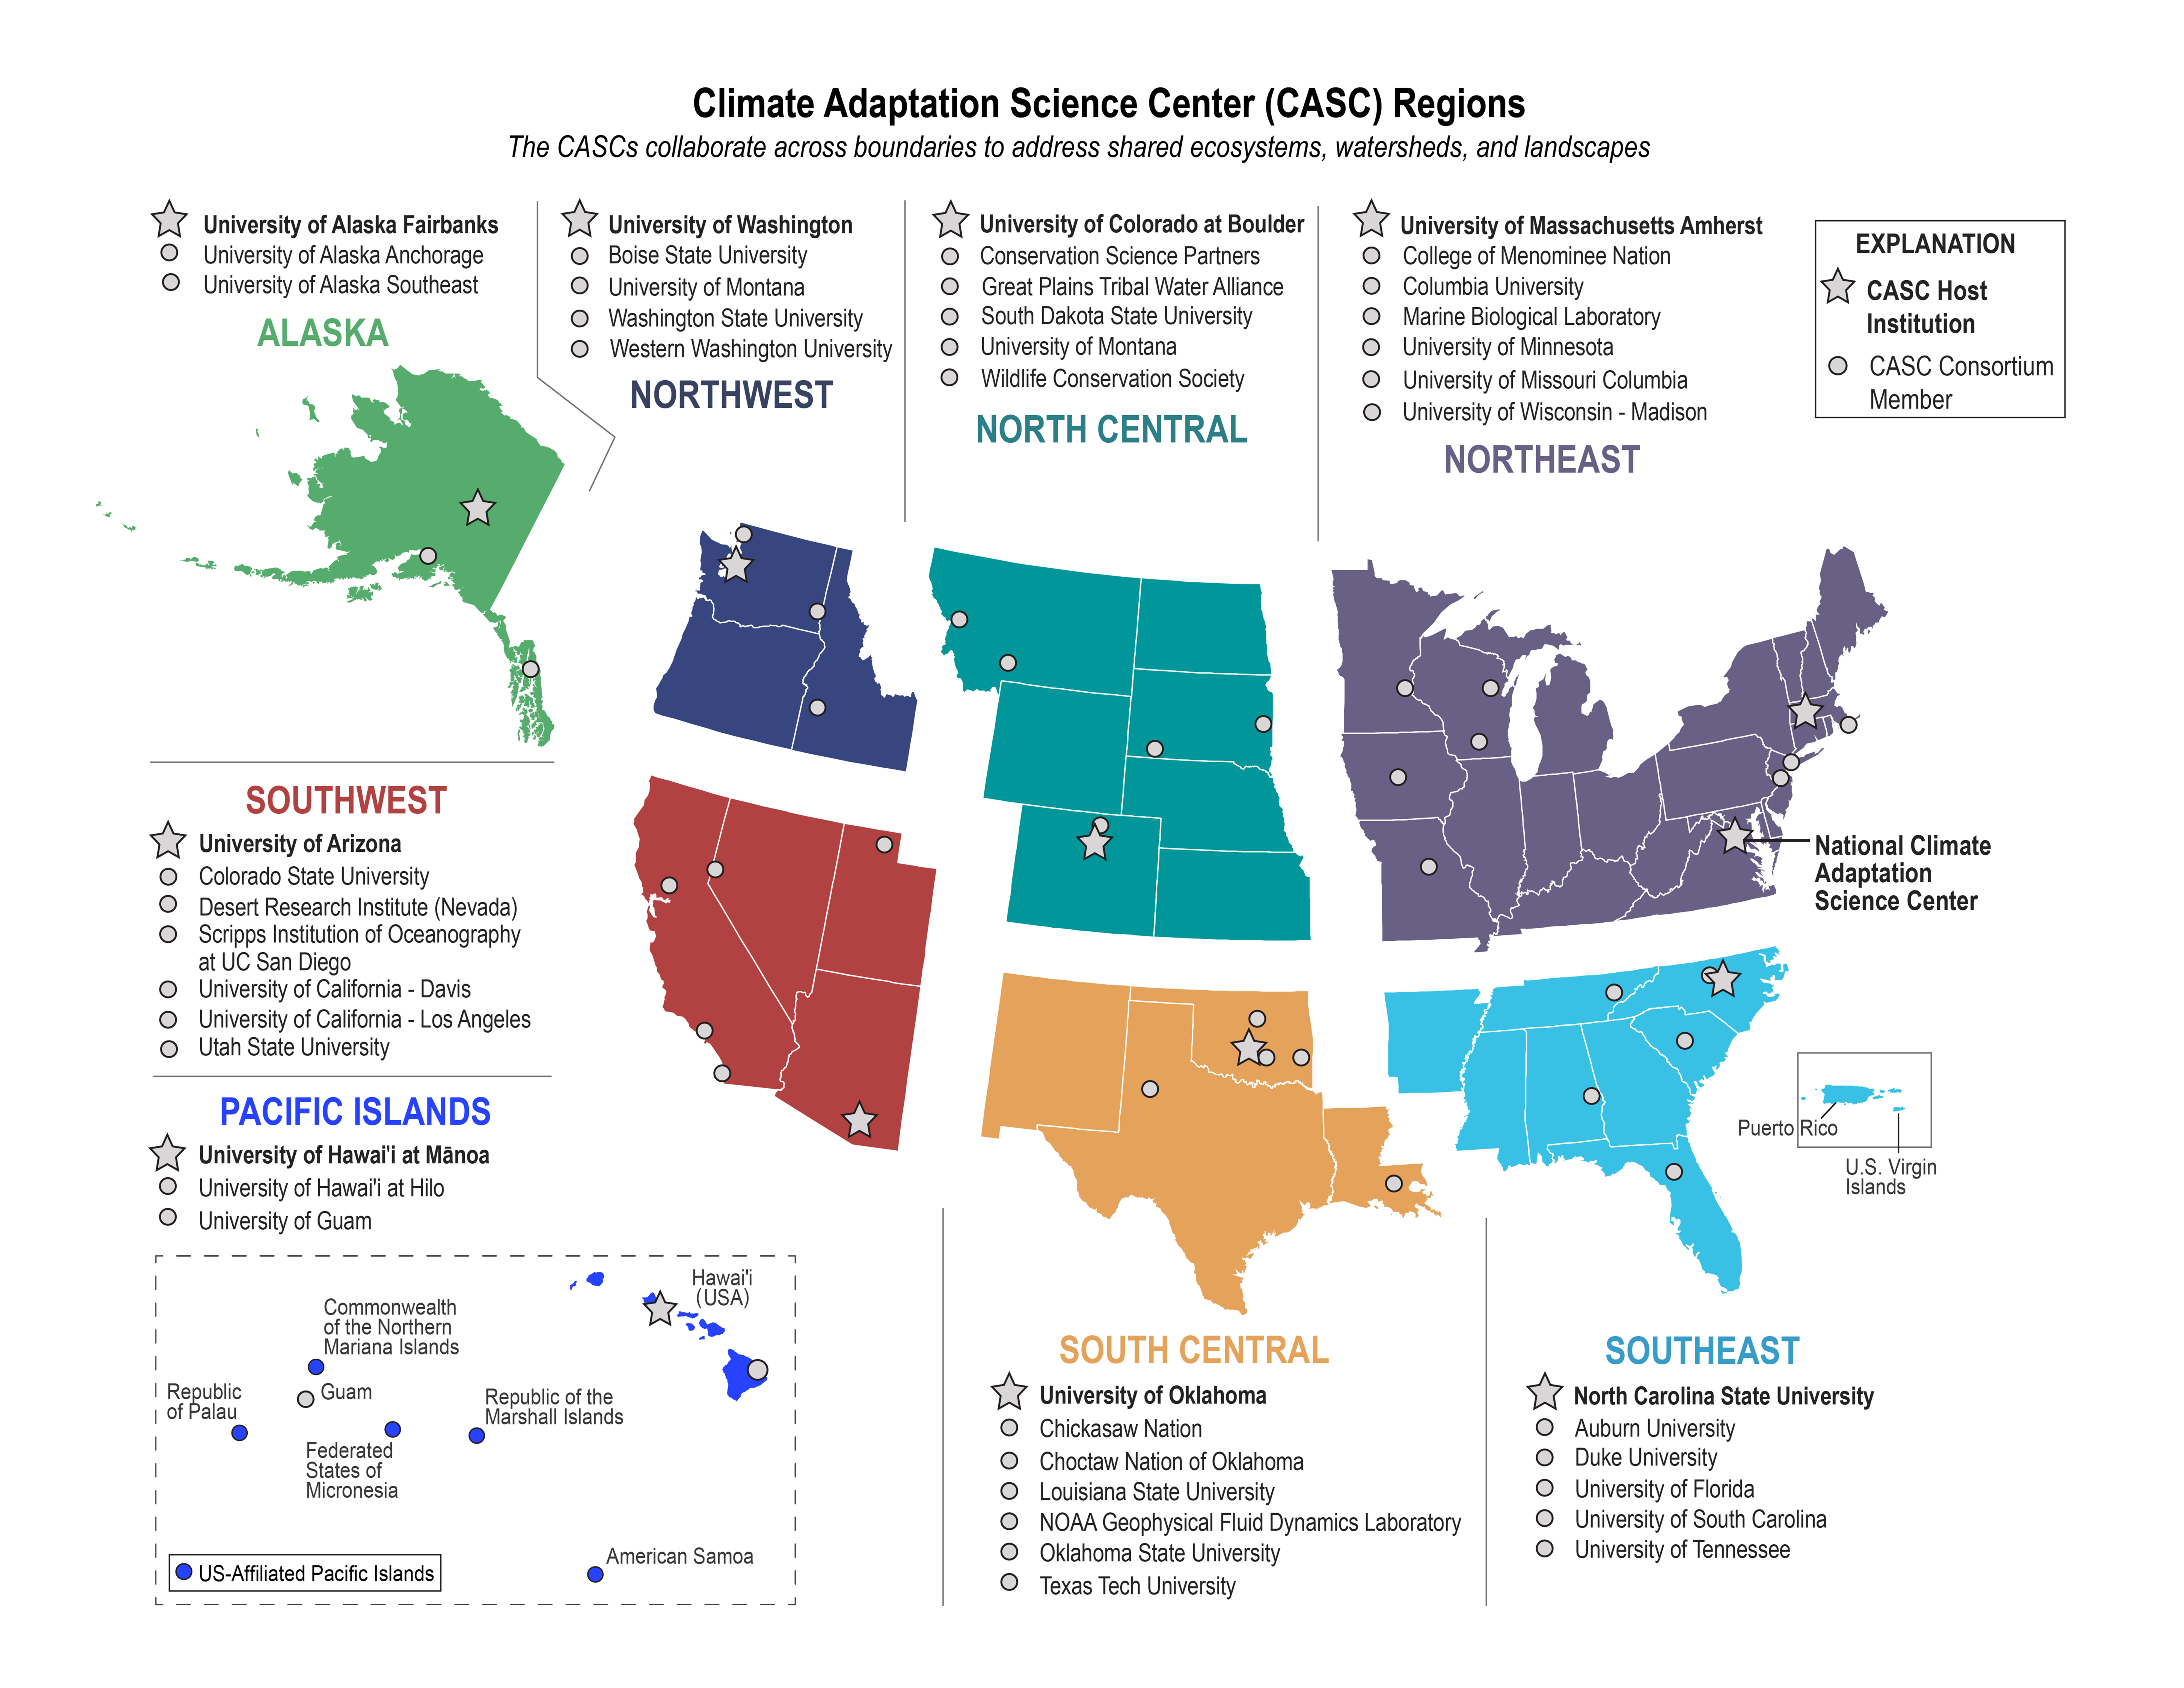 Climate Adaptation Science Center Network